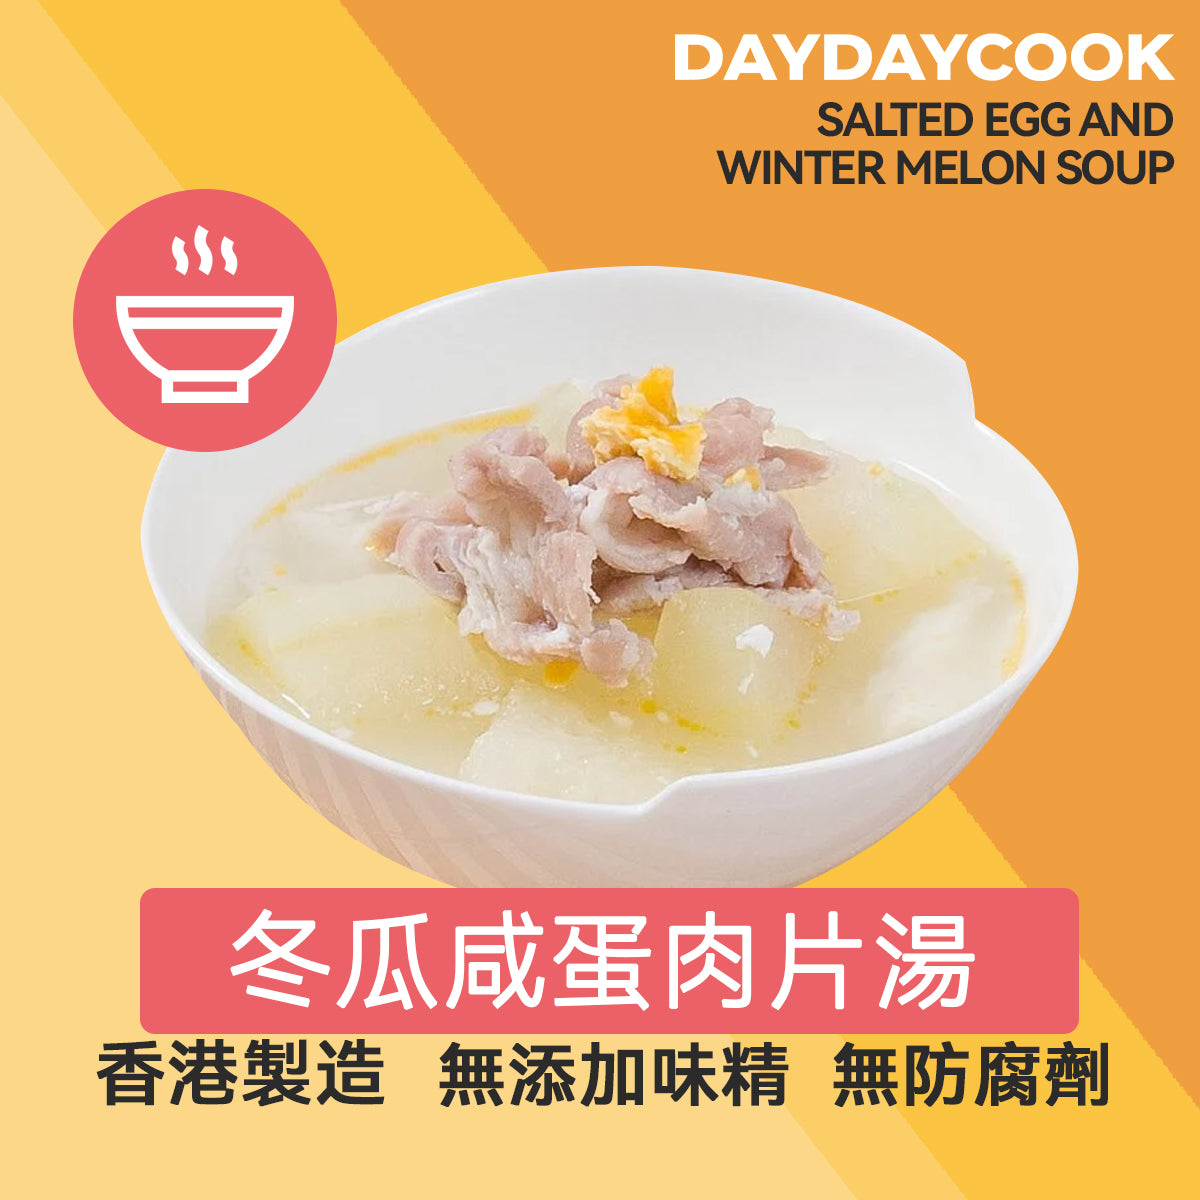 Salted Egg and Winter Melon Soup